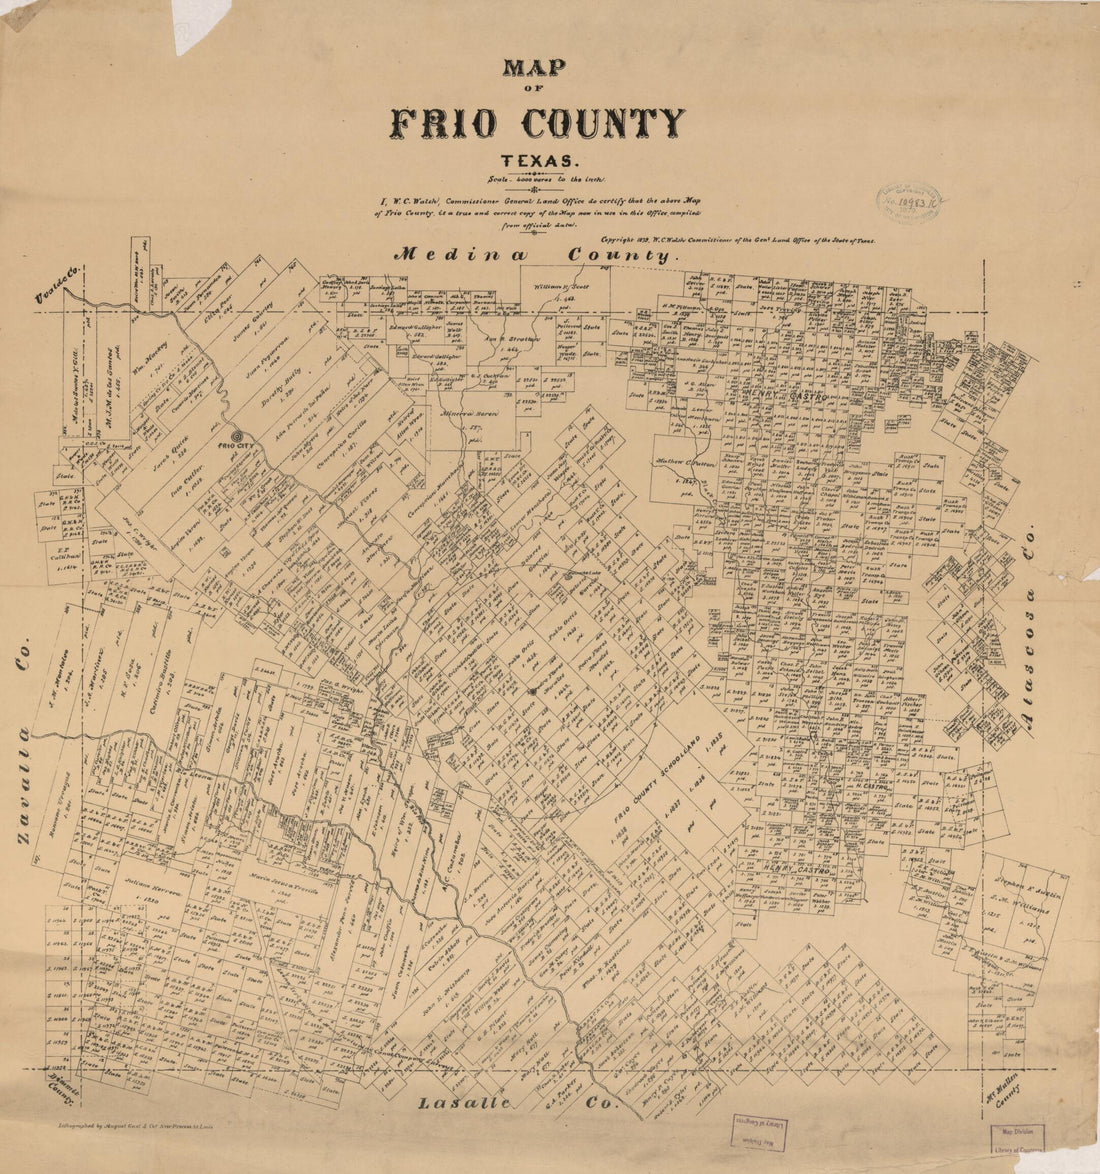 This old map of Map of Frio County, Texas from 1879 was created by  August Gast &amp; Co,  Texas. General Land Office, W. C. (William C.) Walsh in 1879